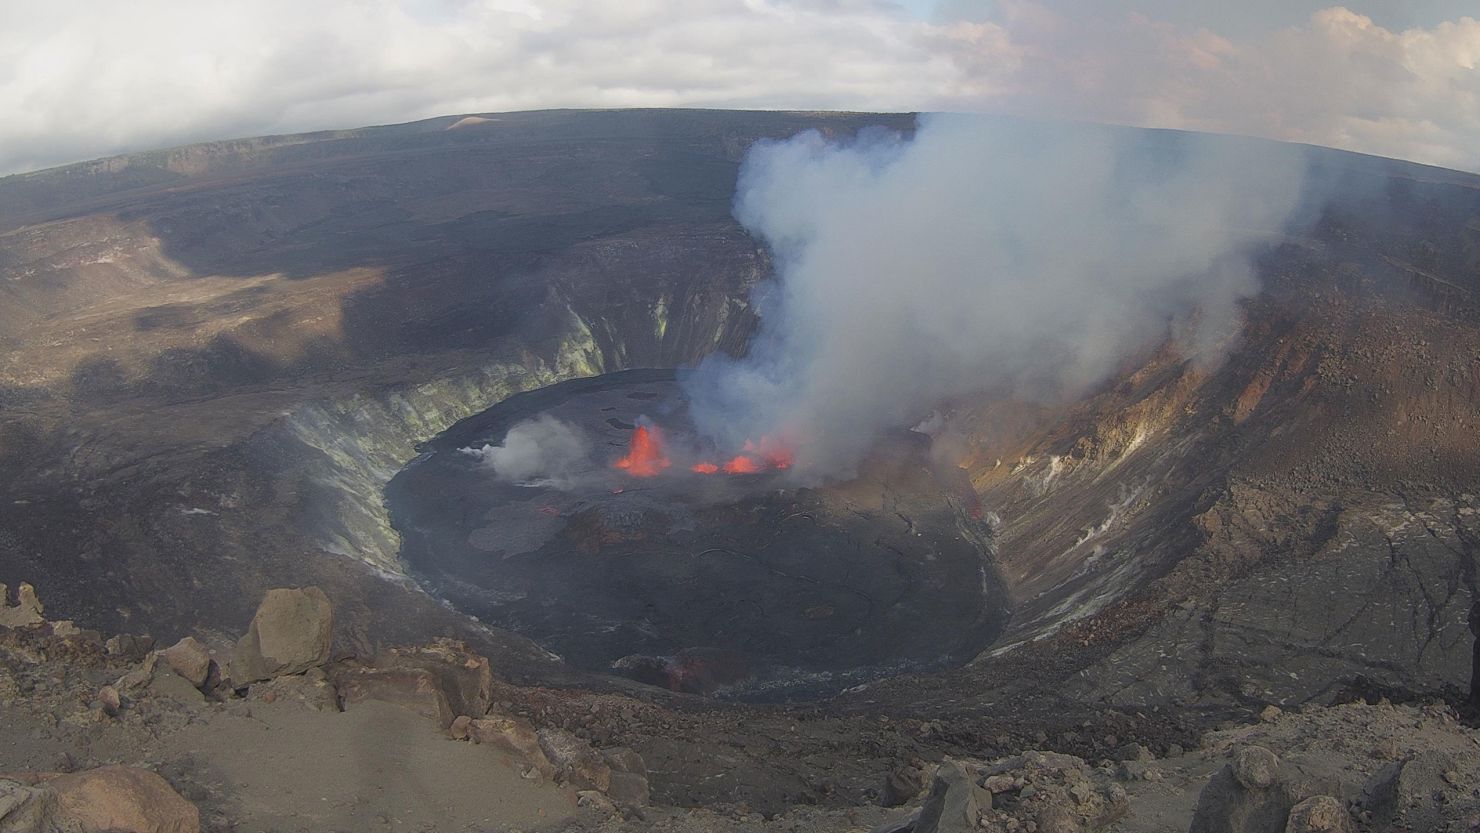 Hawaii's Kilauea volcano began erupting Wednesday, spewing lava for the first time since May.